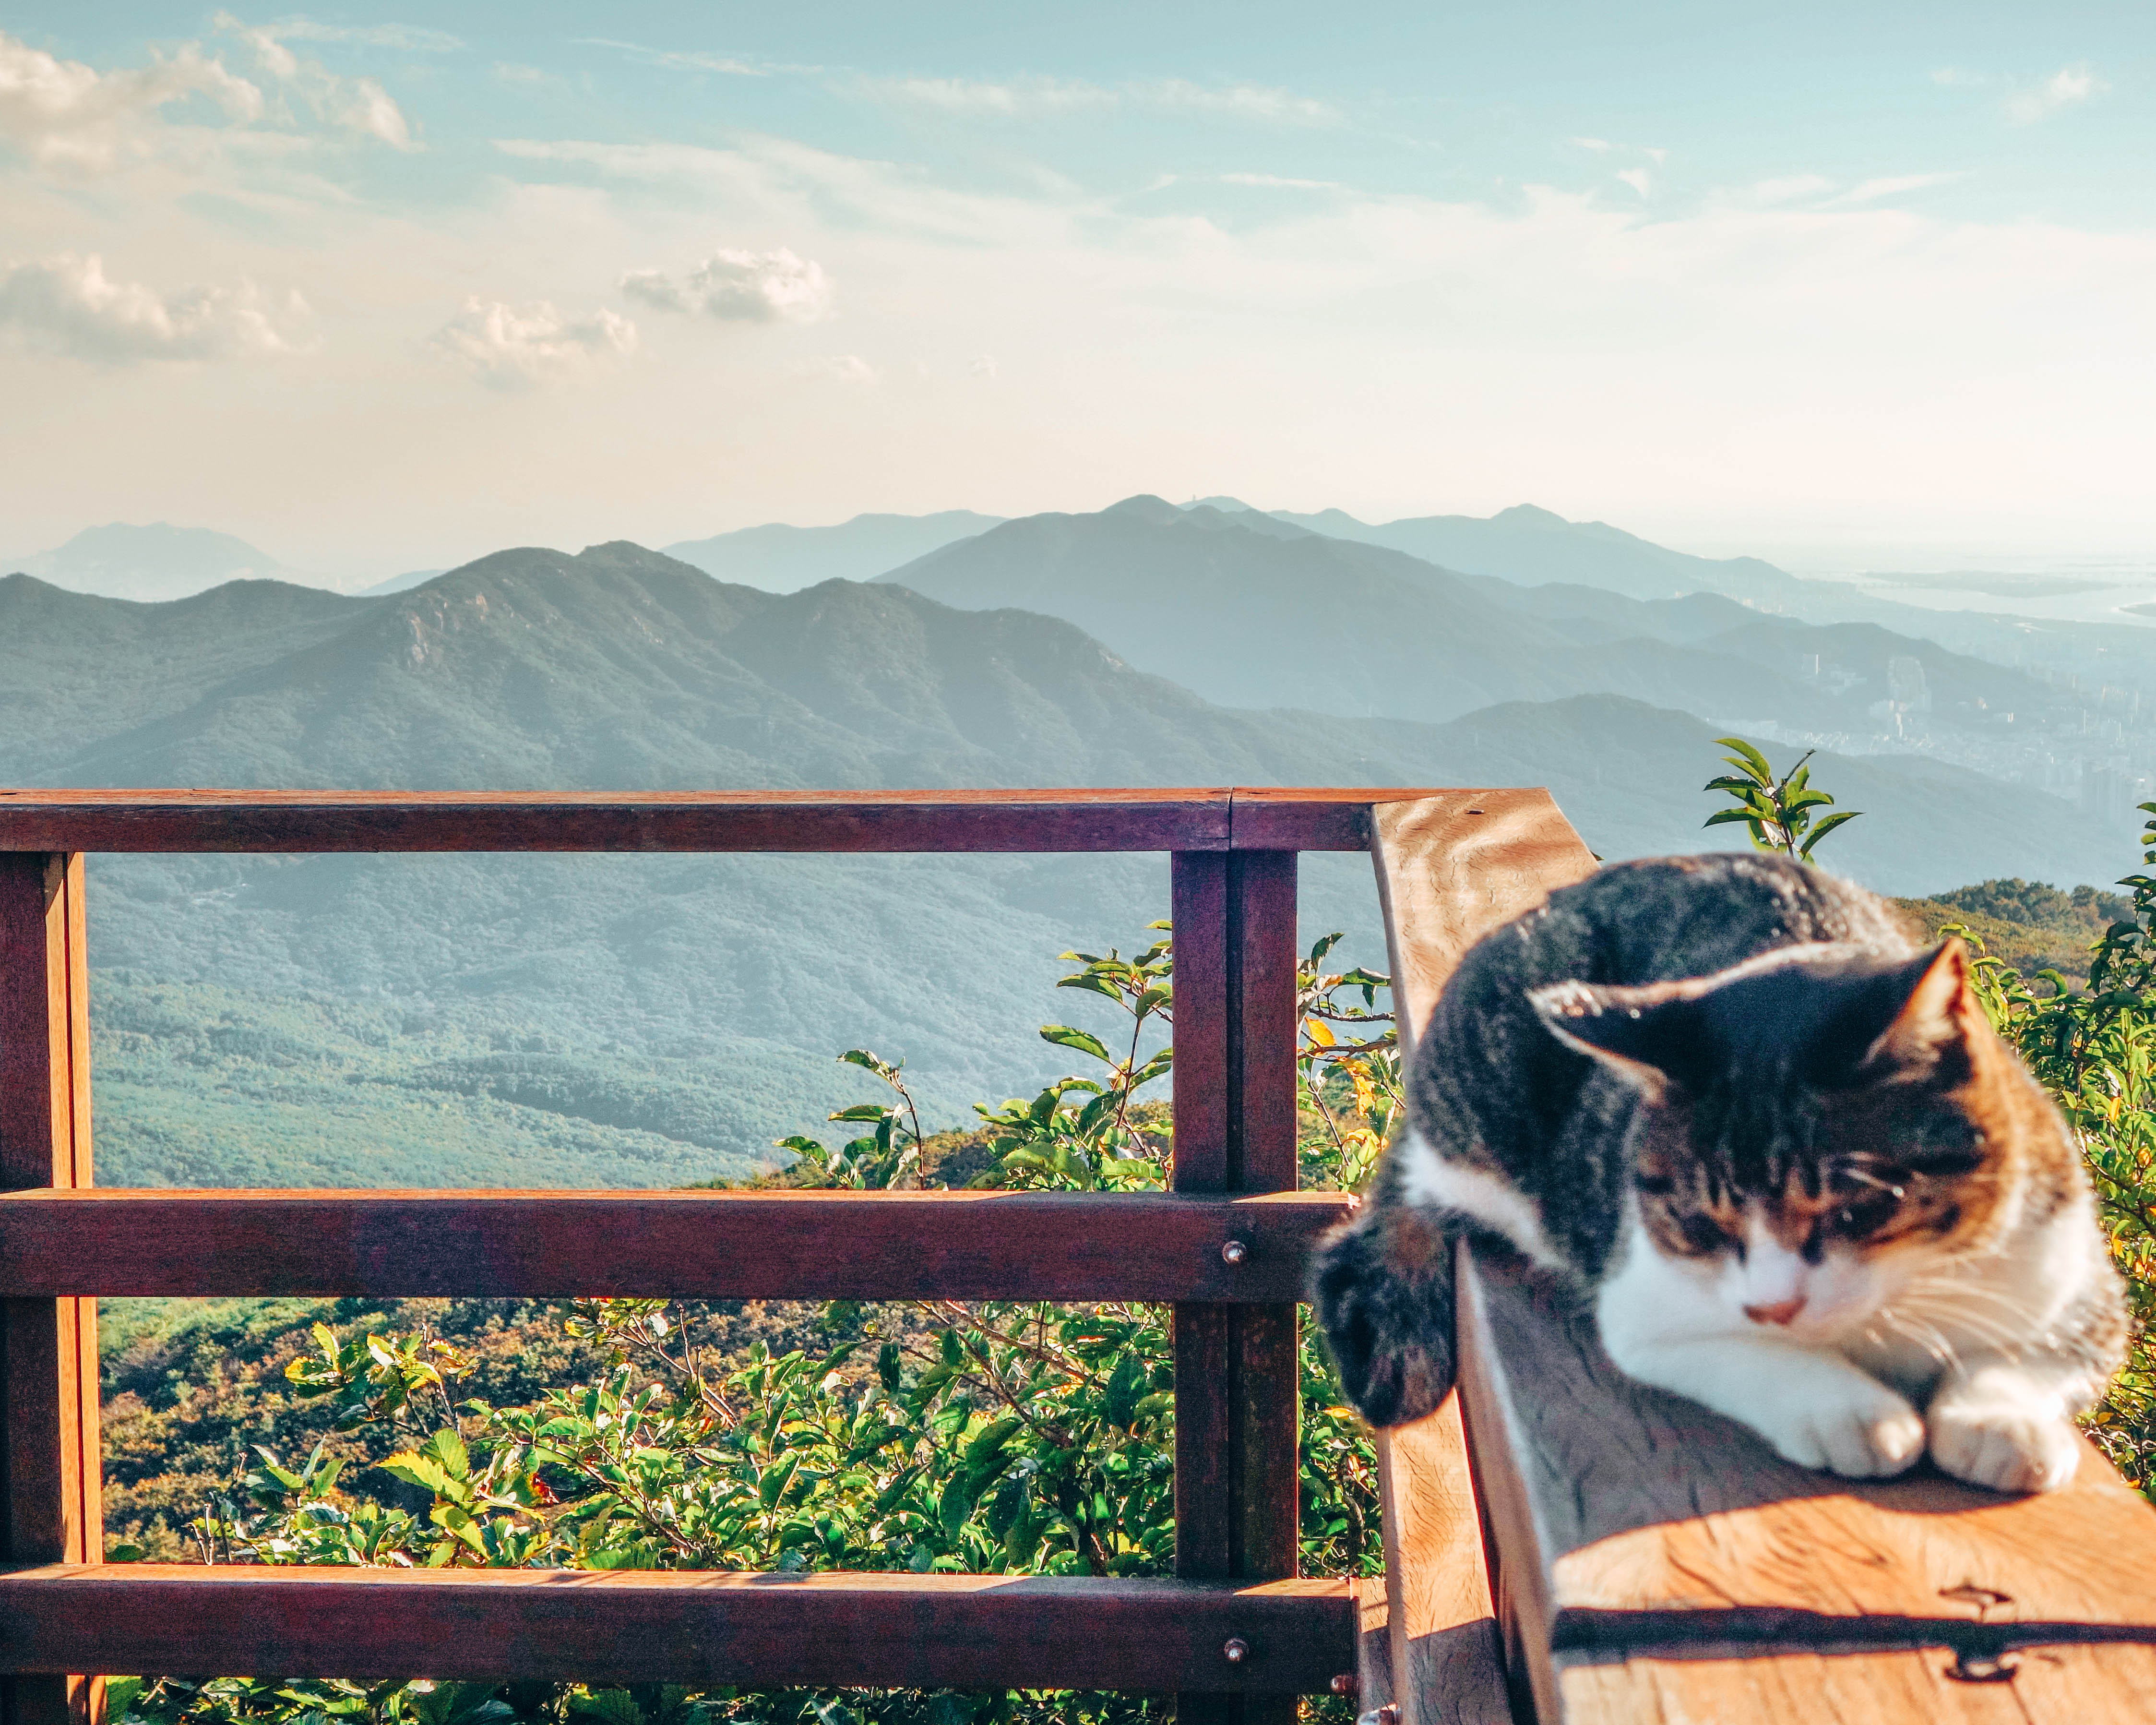 The cats and view from the top of Geumjeongsan mountain in Busan - Wediditourway.com 